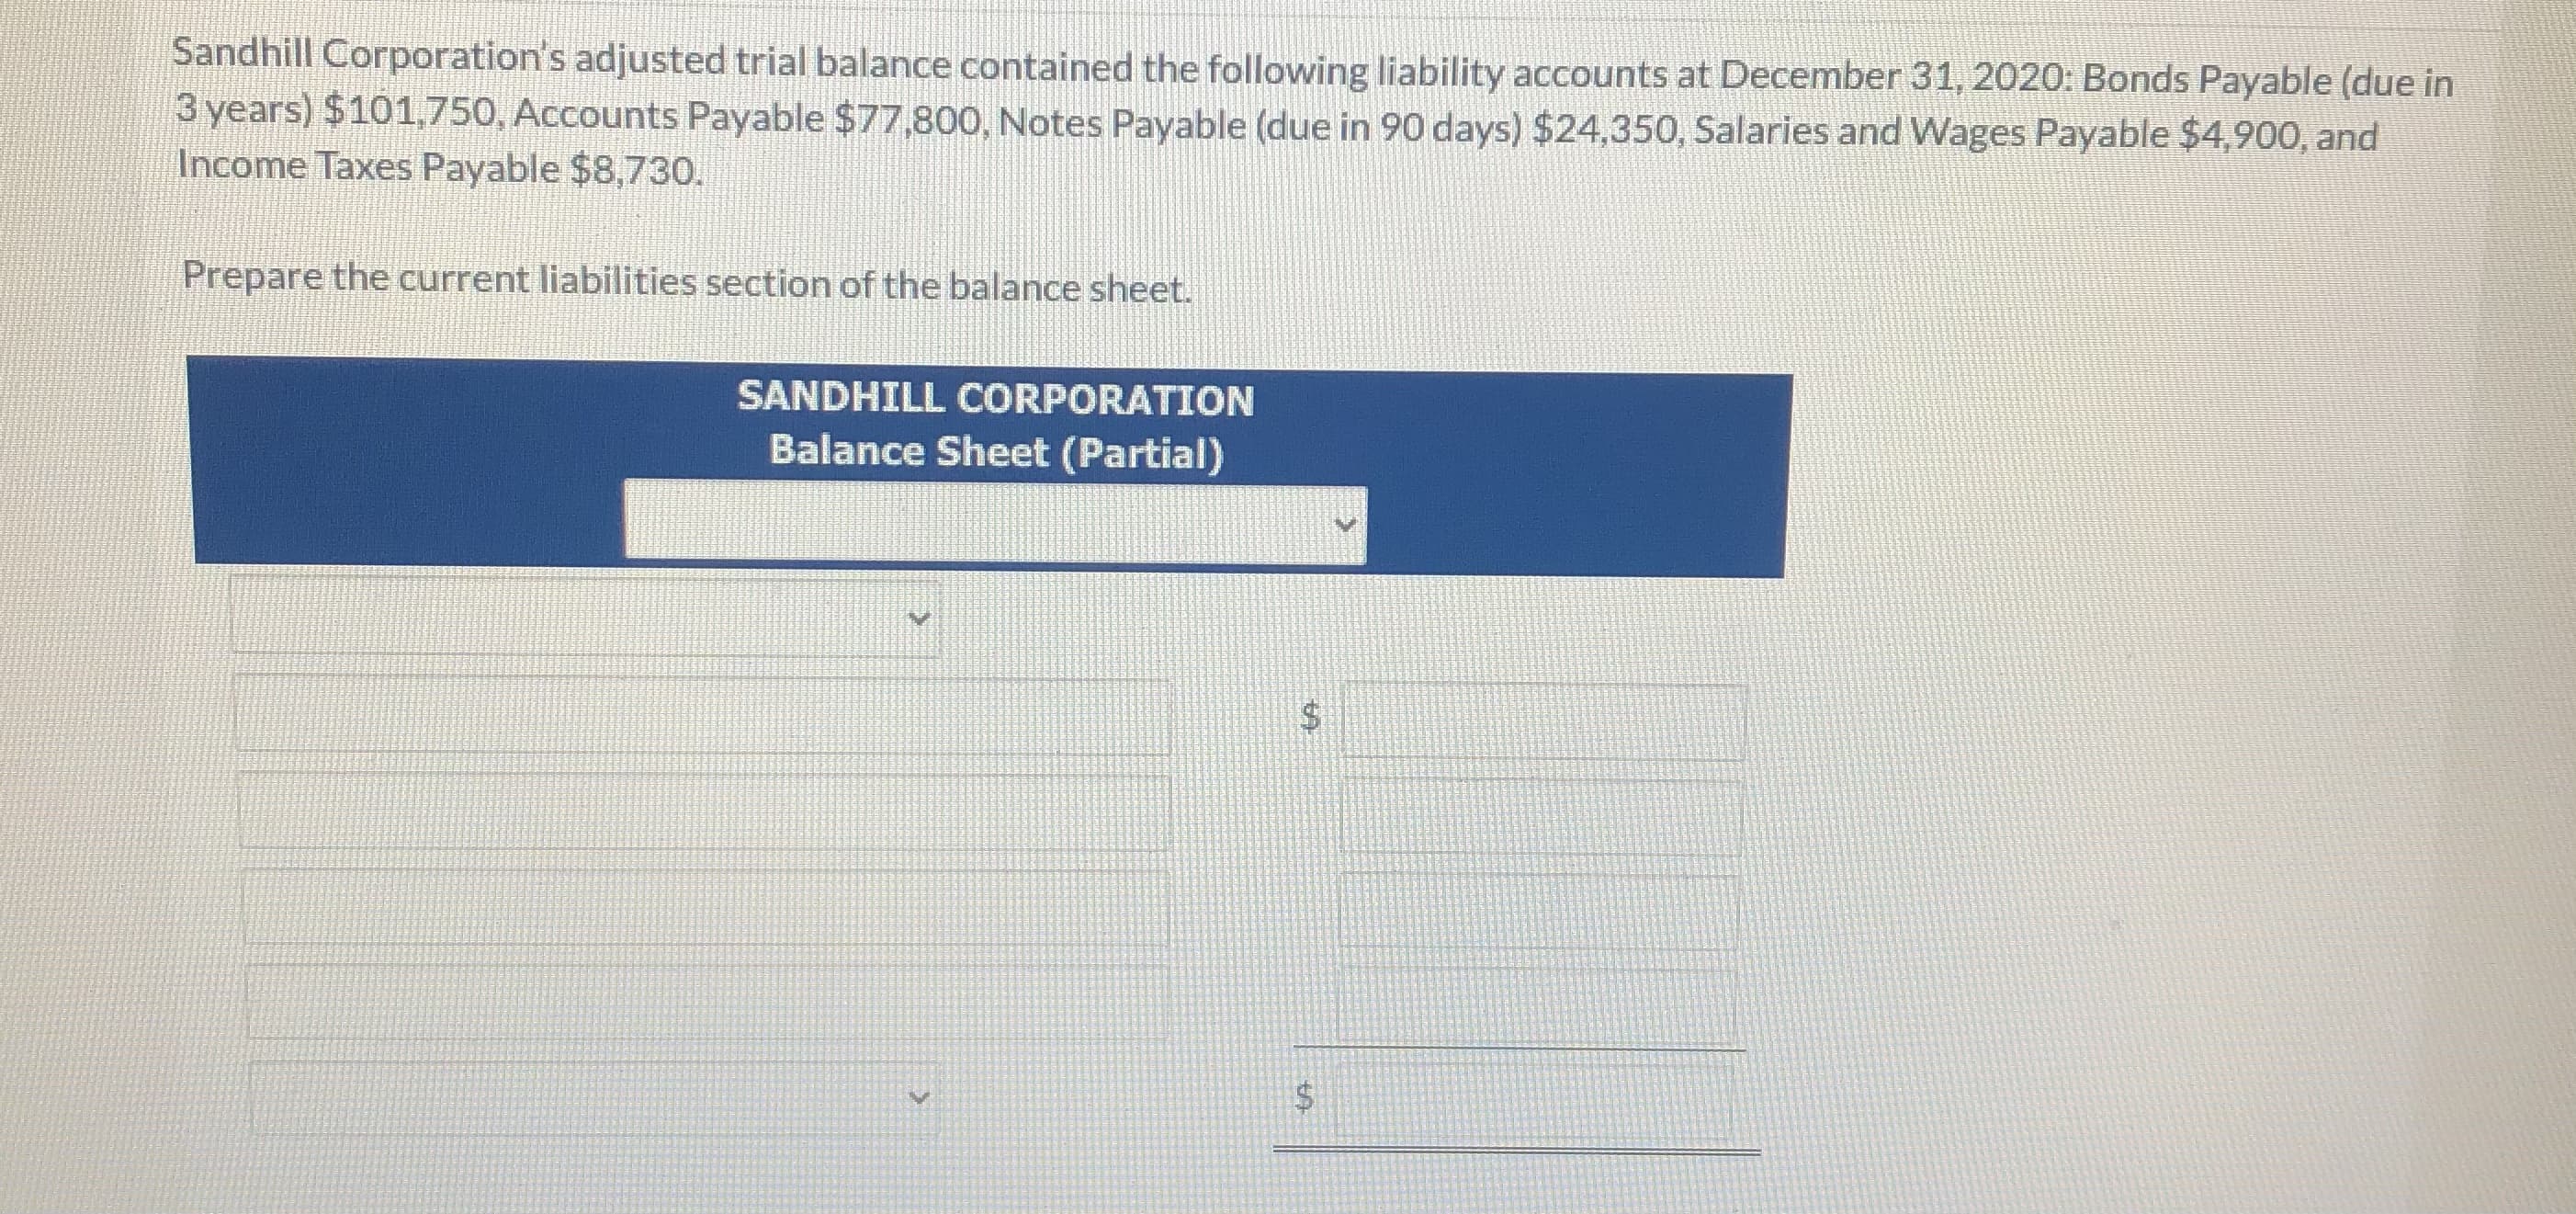 Sandhill Corporation's adjusted trial balance contained the following liability accounts at December 31, 2020: Bonds Payable (due in
3 years) $101,750, Accounts Payable $77,800, Notes Payable (due in 90 days) $24,350, Salaries and Wages Payable $4,900, and
Income Taxes Payable $8,730.
Prepare the current liabilities section of the balance sheet.
